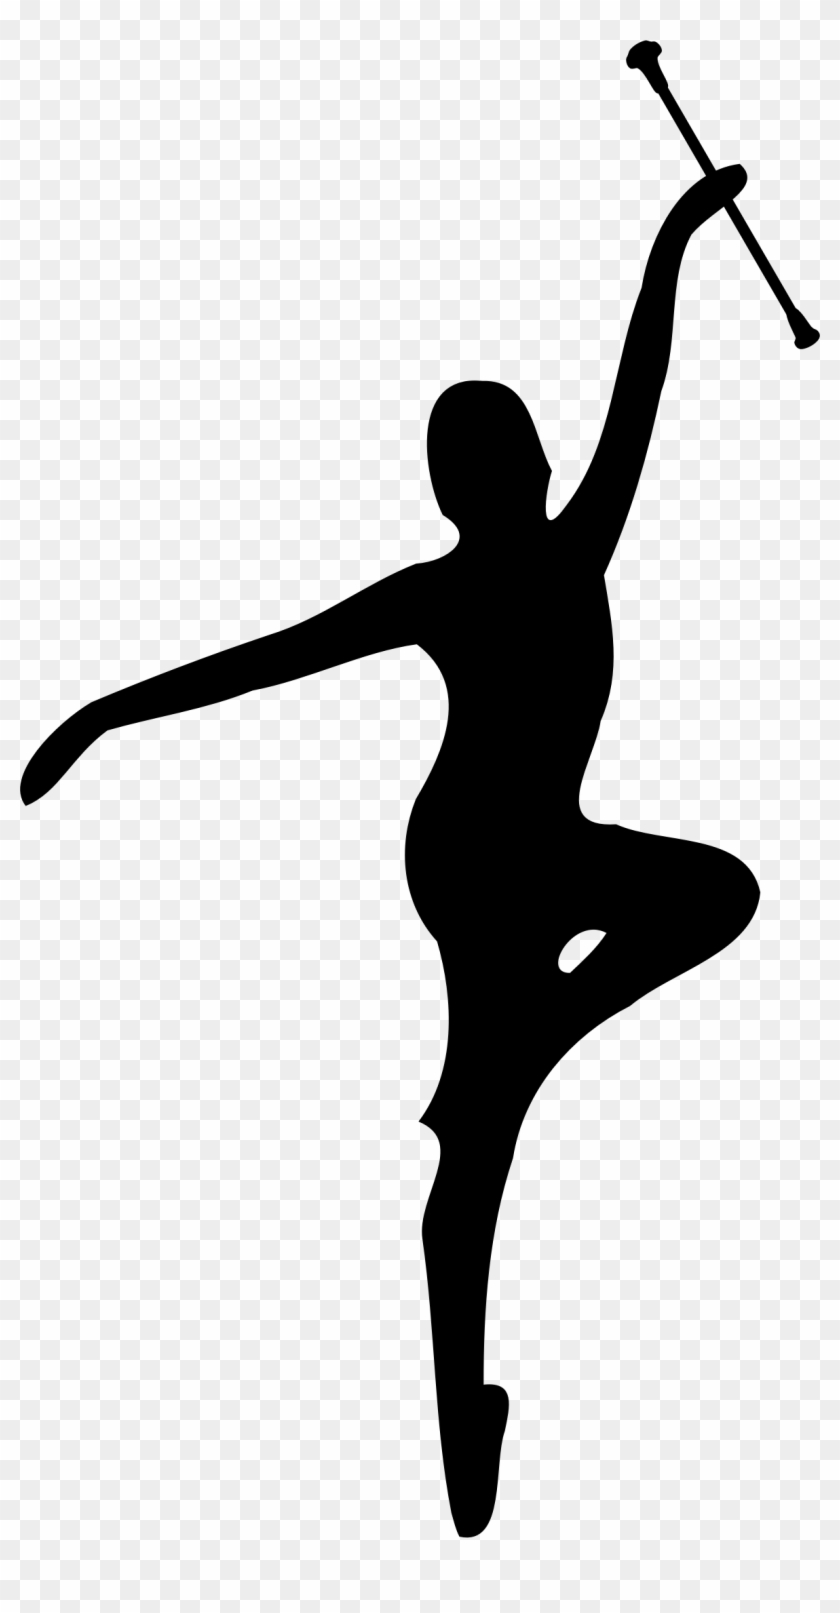 Silhouette - Olympic Fencing Logo #402265